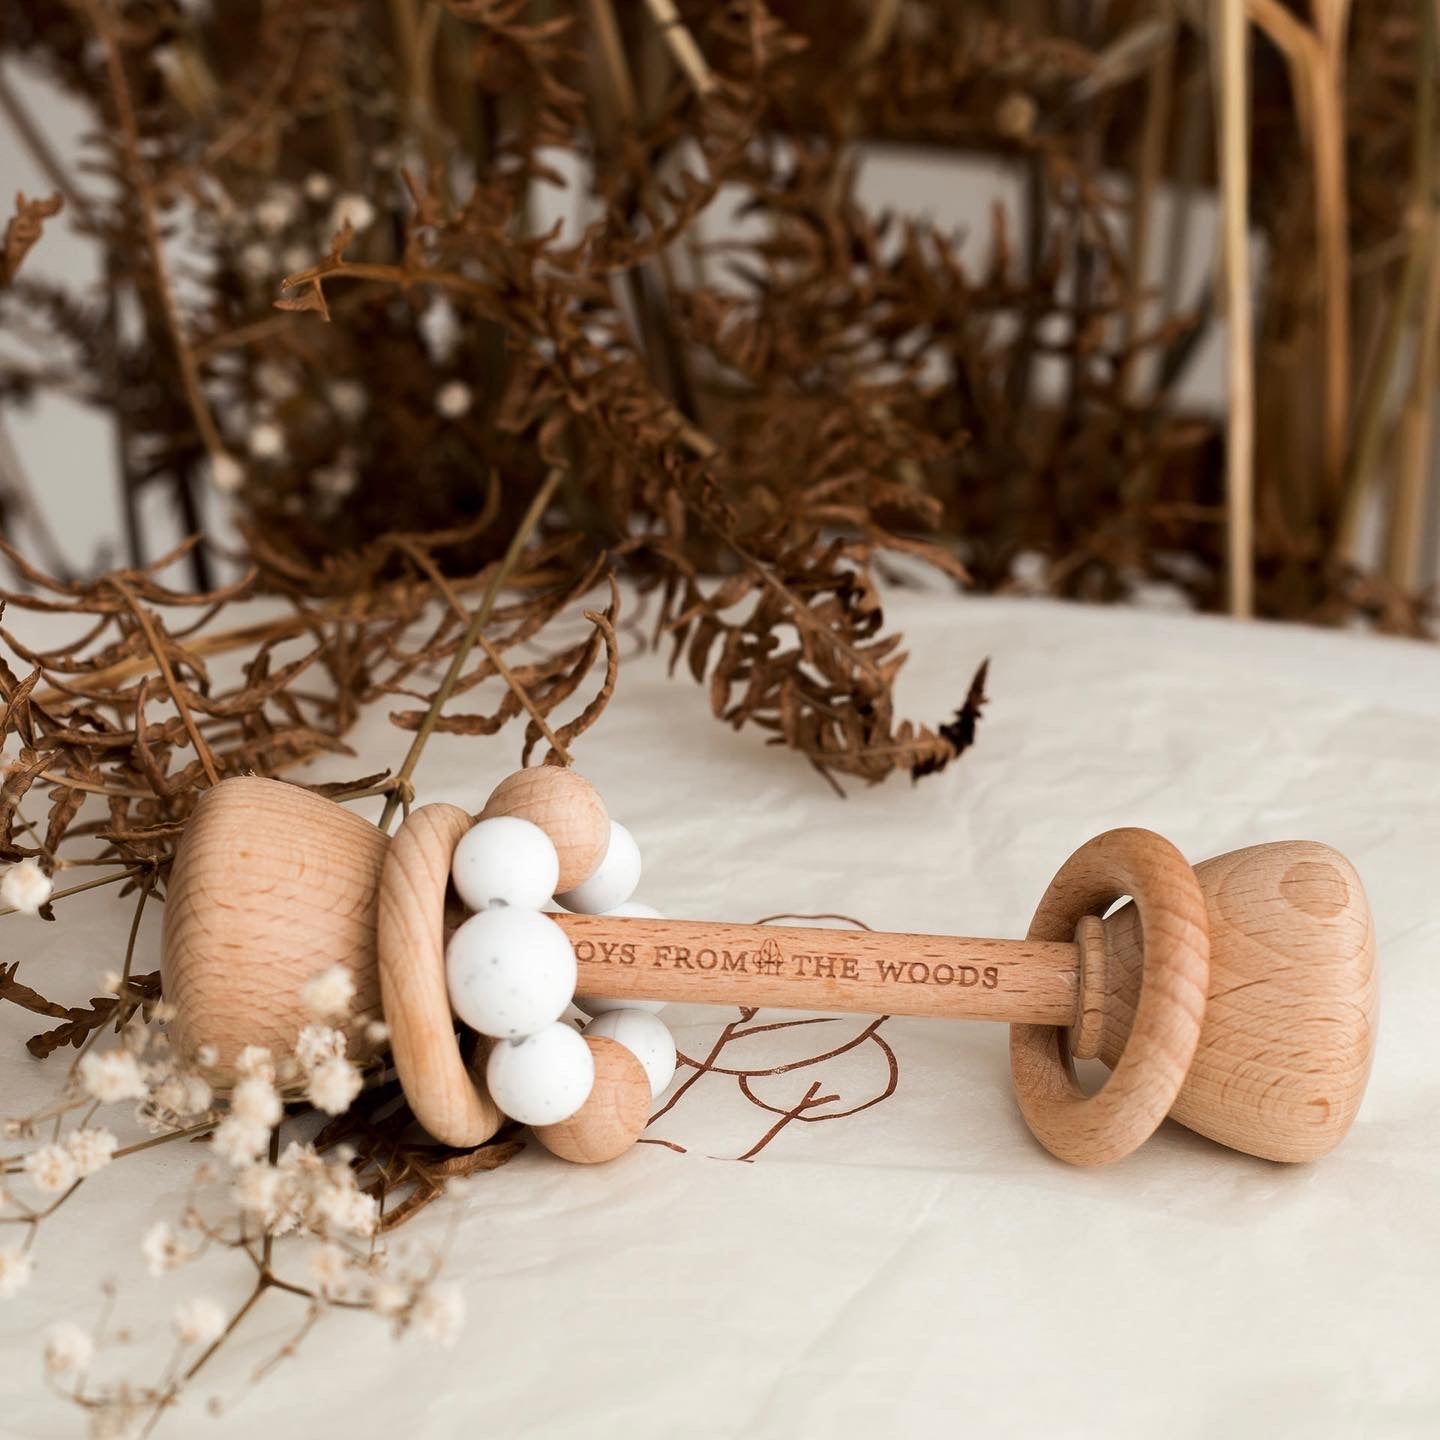 Wooden Baby Dumbbell Rattle with Silicone Beads